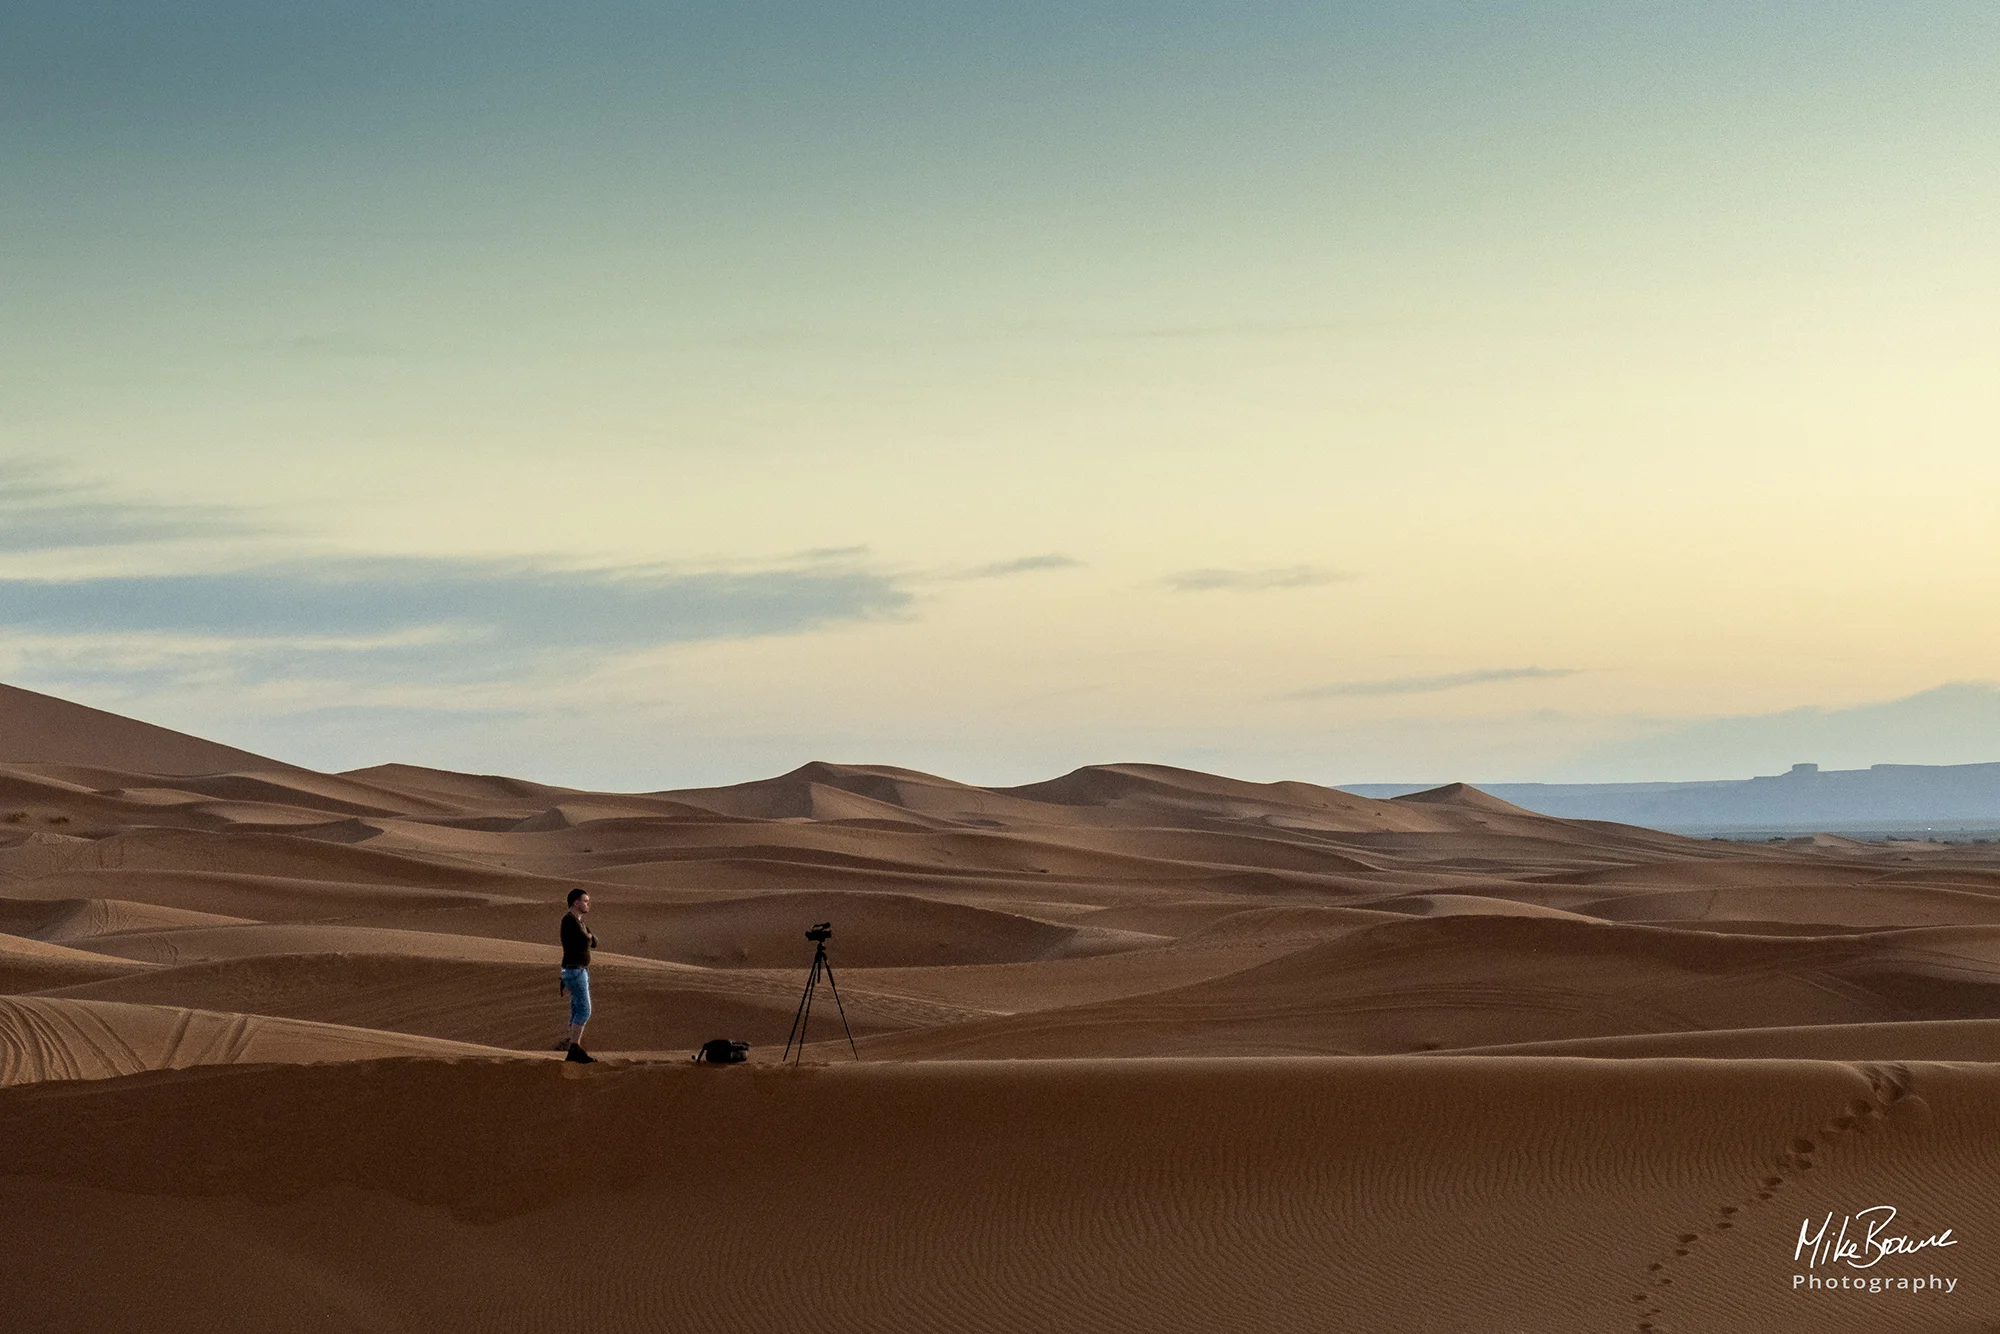 Man with camera on tripod standing amongst sand dunes in a desert at sunset